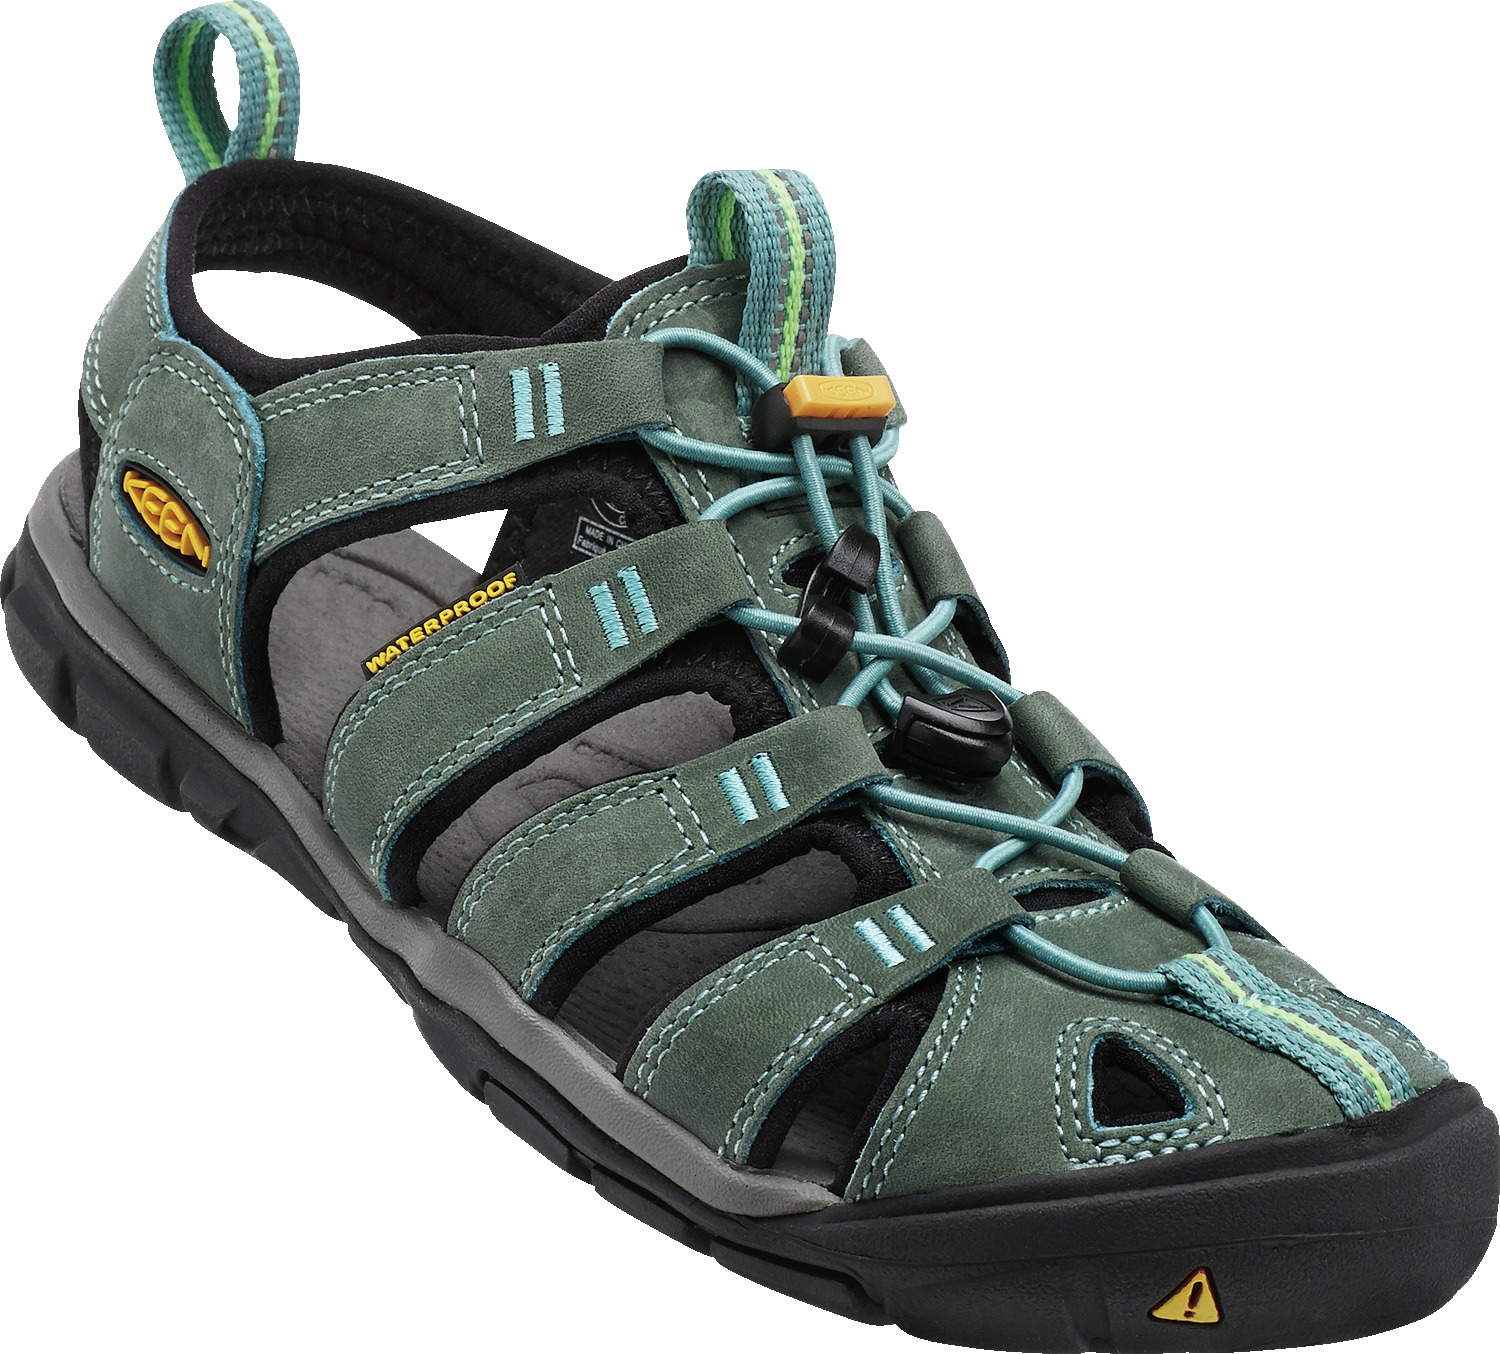 Keen dámské sandály Clearwater CNX Leather Women - Mineral Blue/Yellow Barva: mineral blue/yellow, Velikost: 3,5 UK (36 EU / 23 cm)